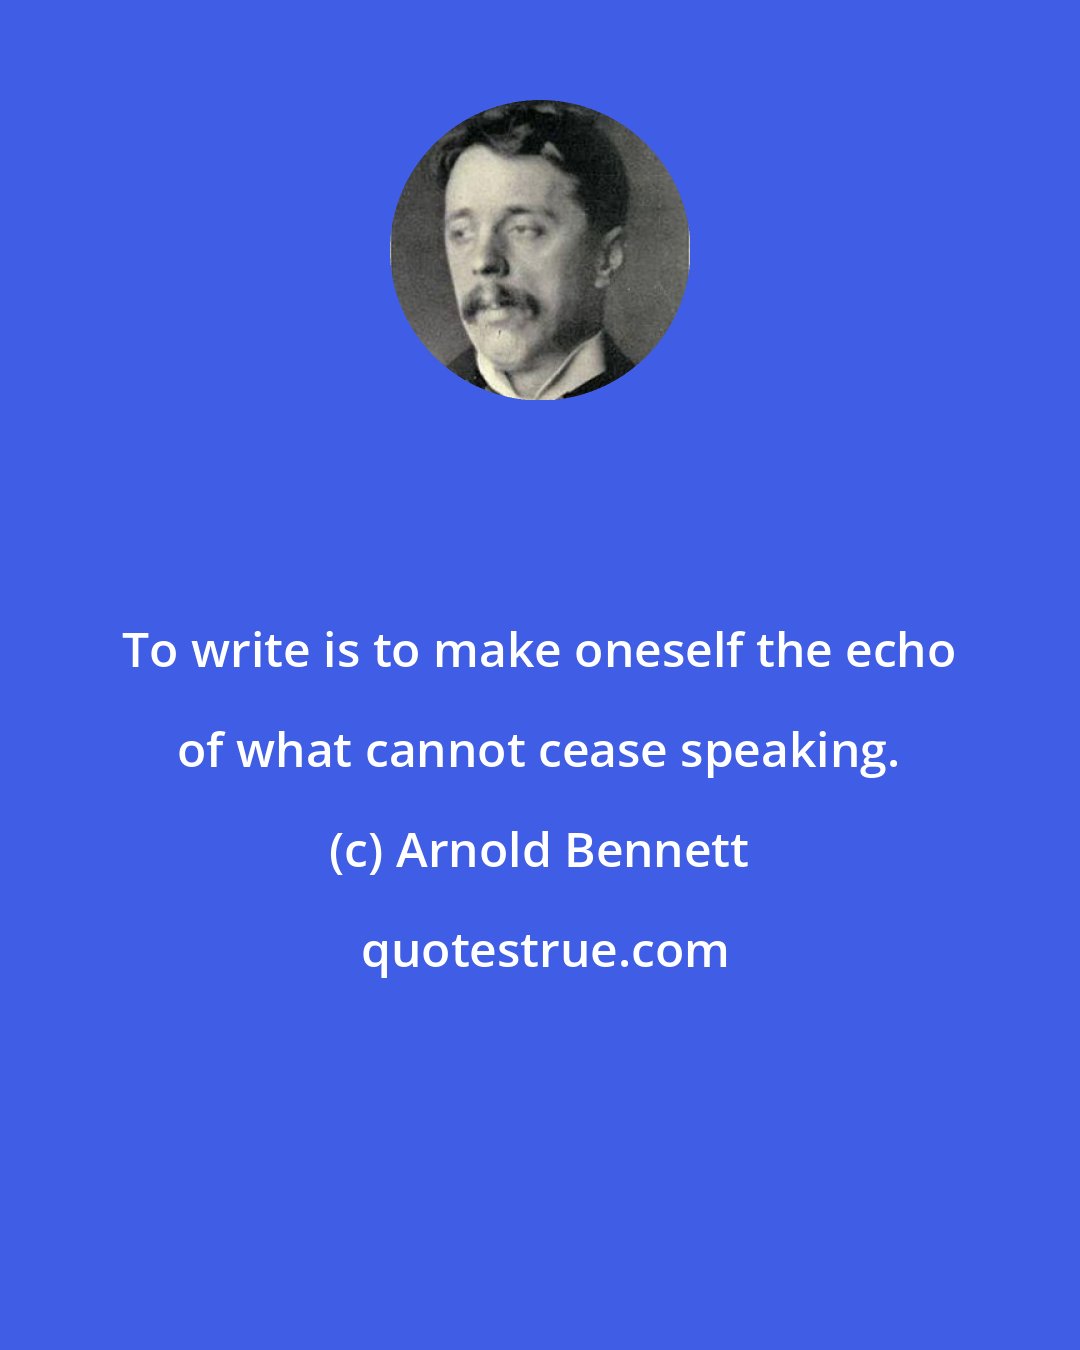 Arnold Bennett: To write is to make oneself the echo of what cannot cease speaking.